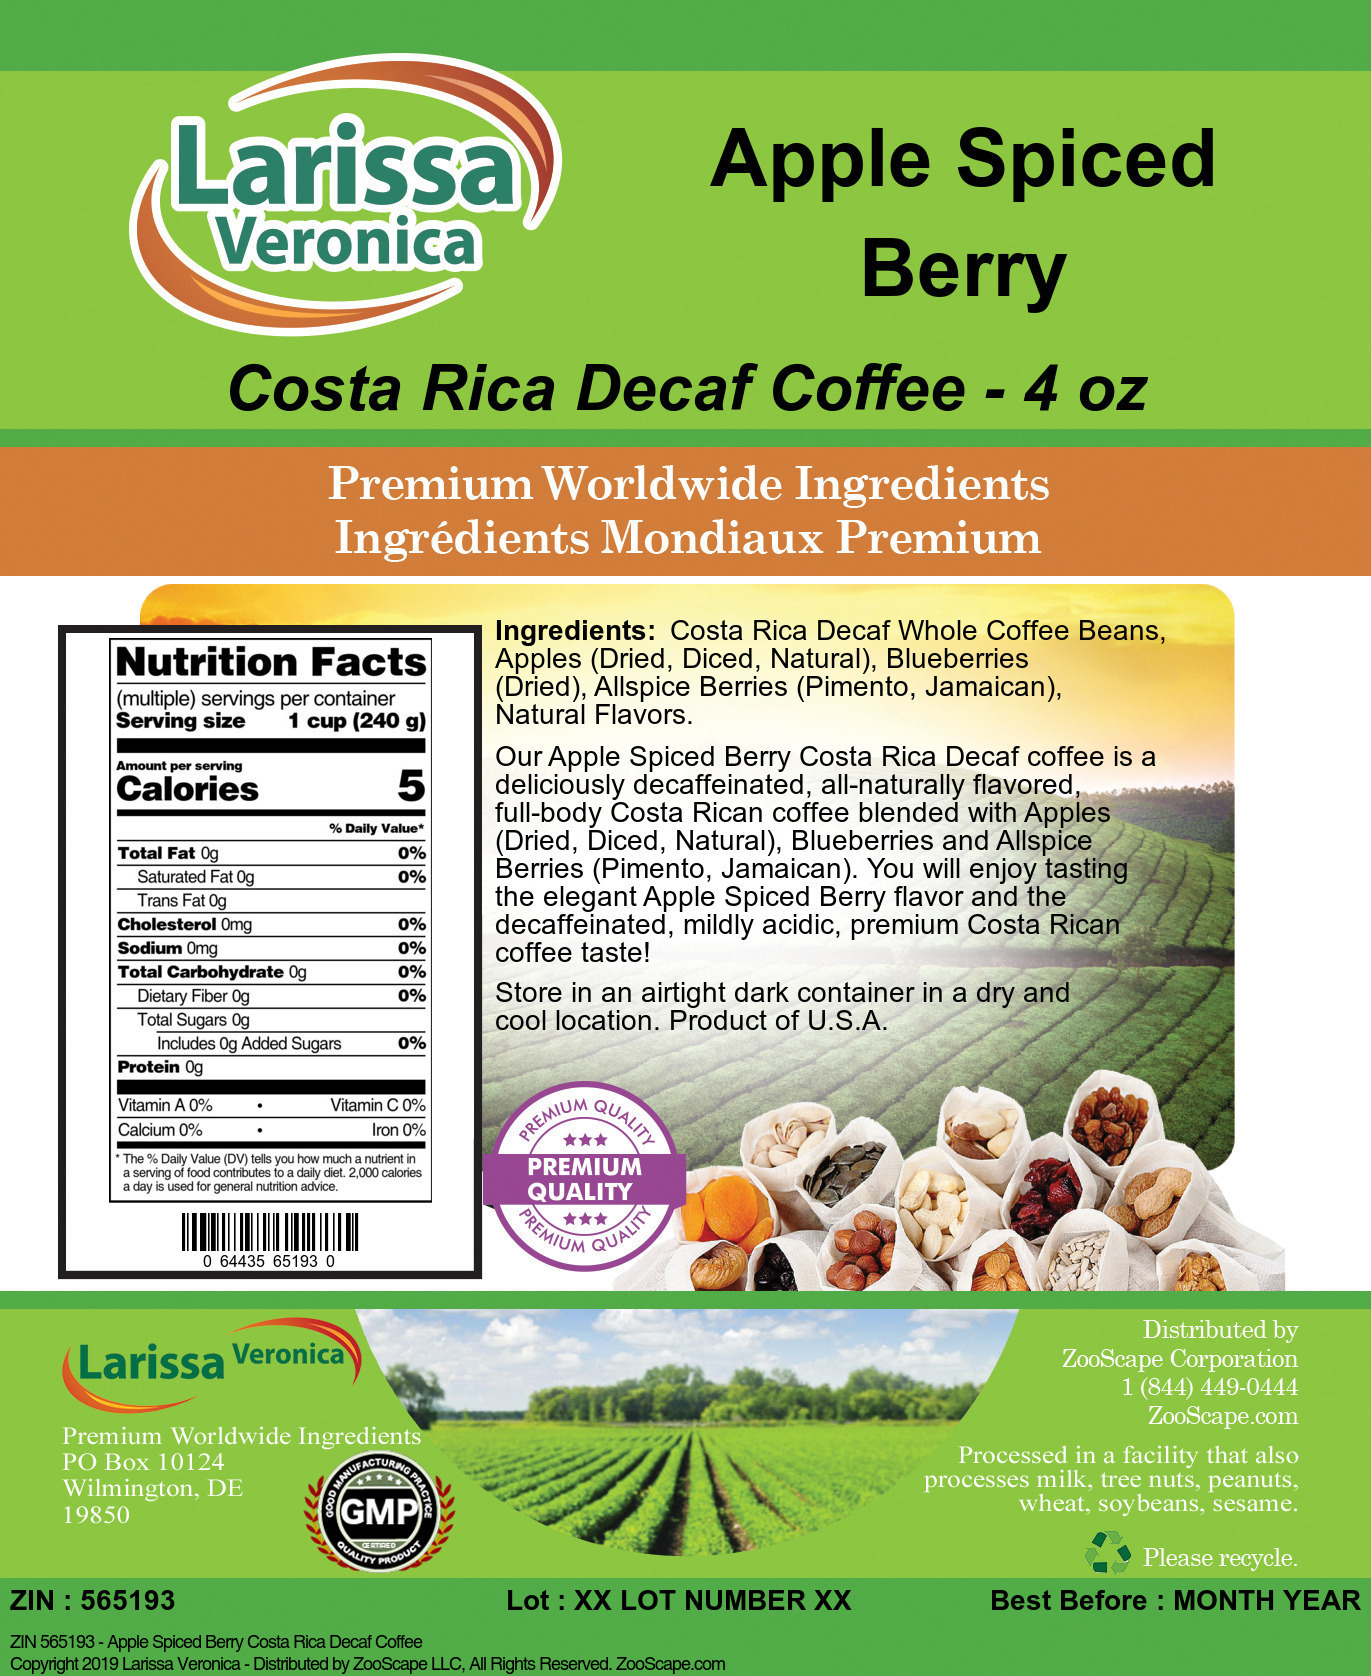 Apple Spiced Berry Costa Rica Decaf Coffee - Label